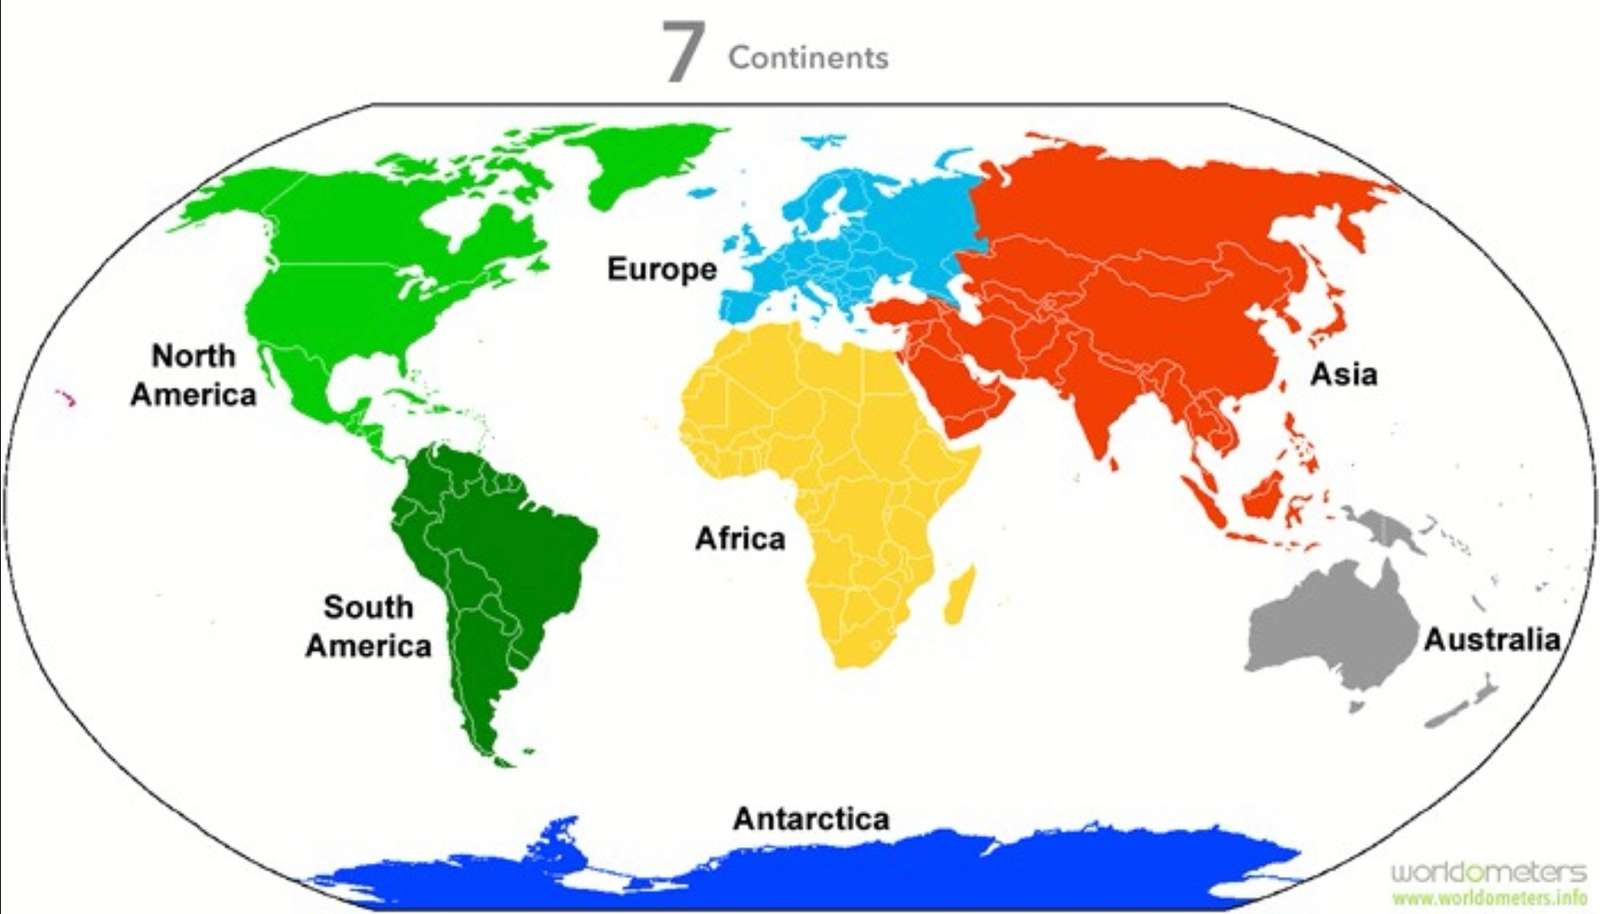 Apparent Fit of the Continents puzzle online from photo